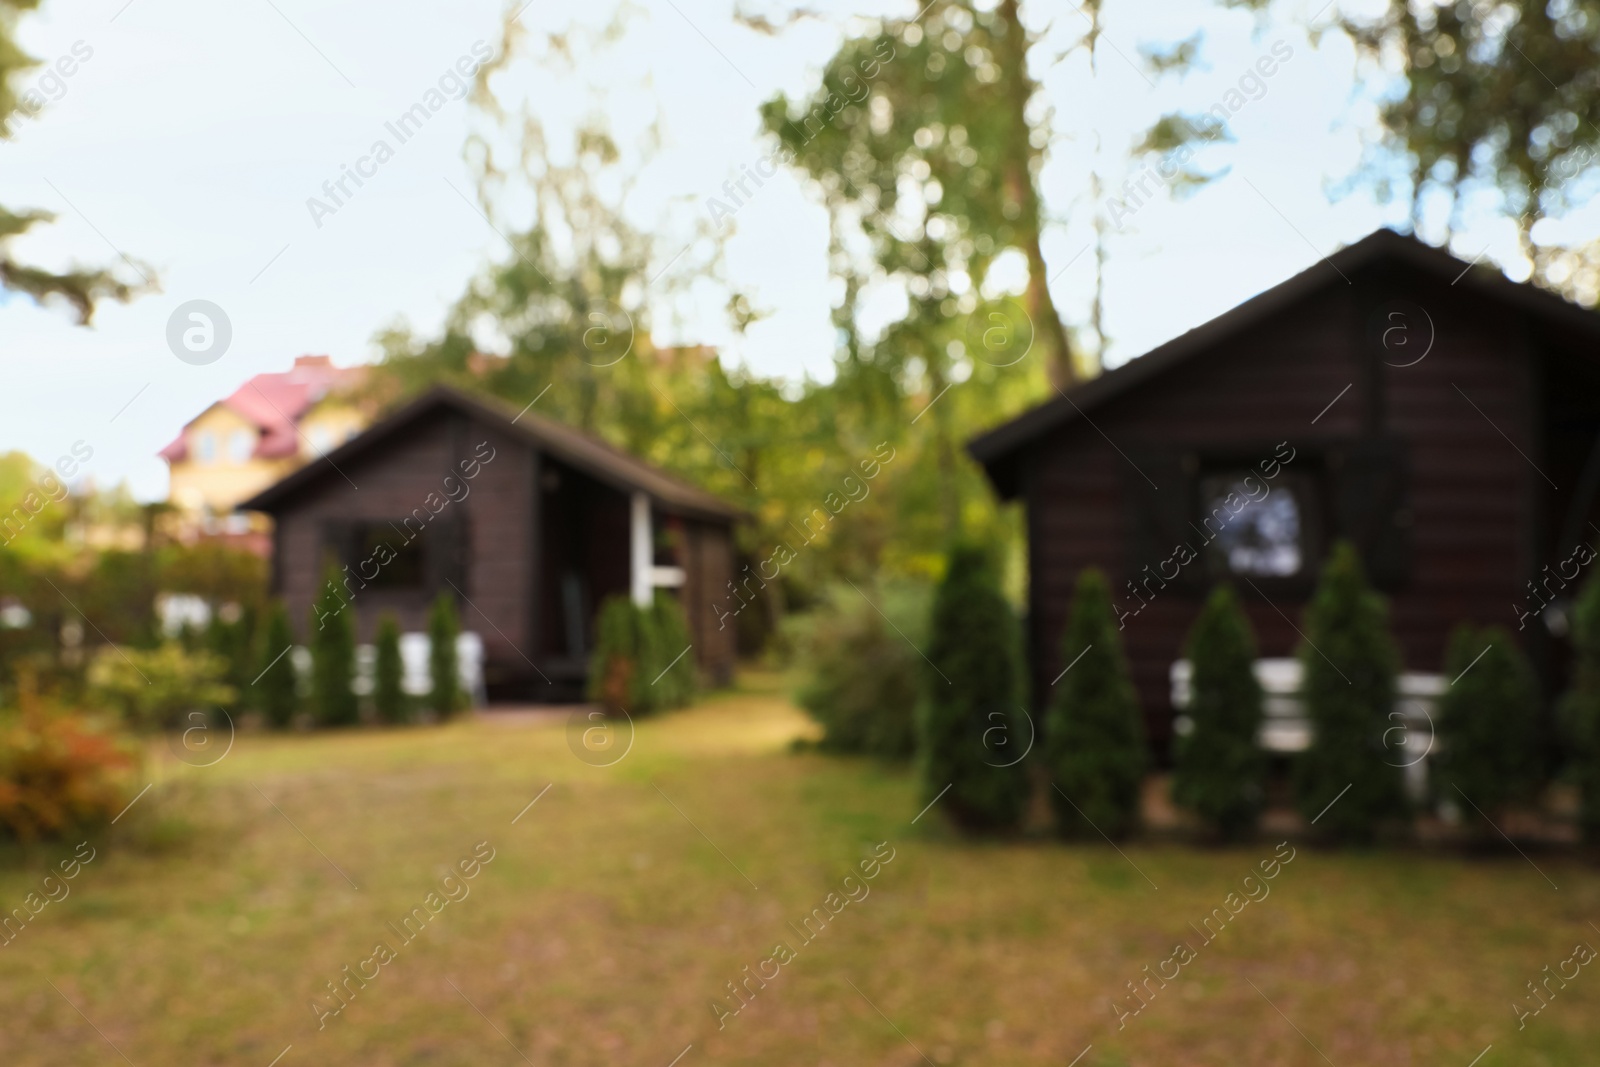 Photo of Blurred view of cozy wooden houses outdoors